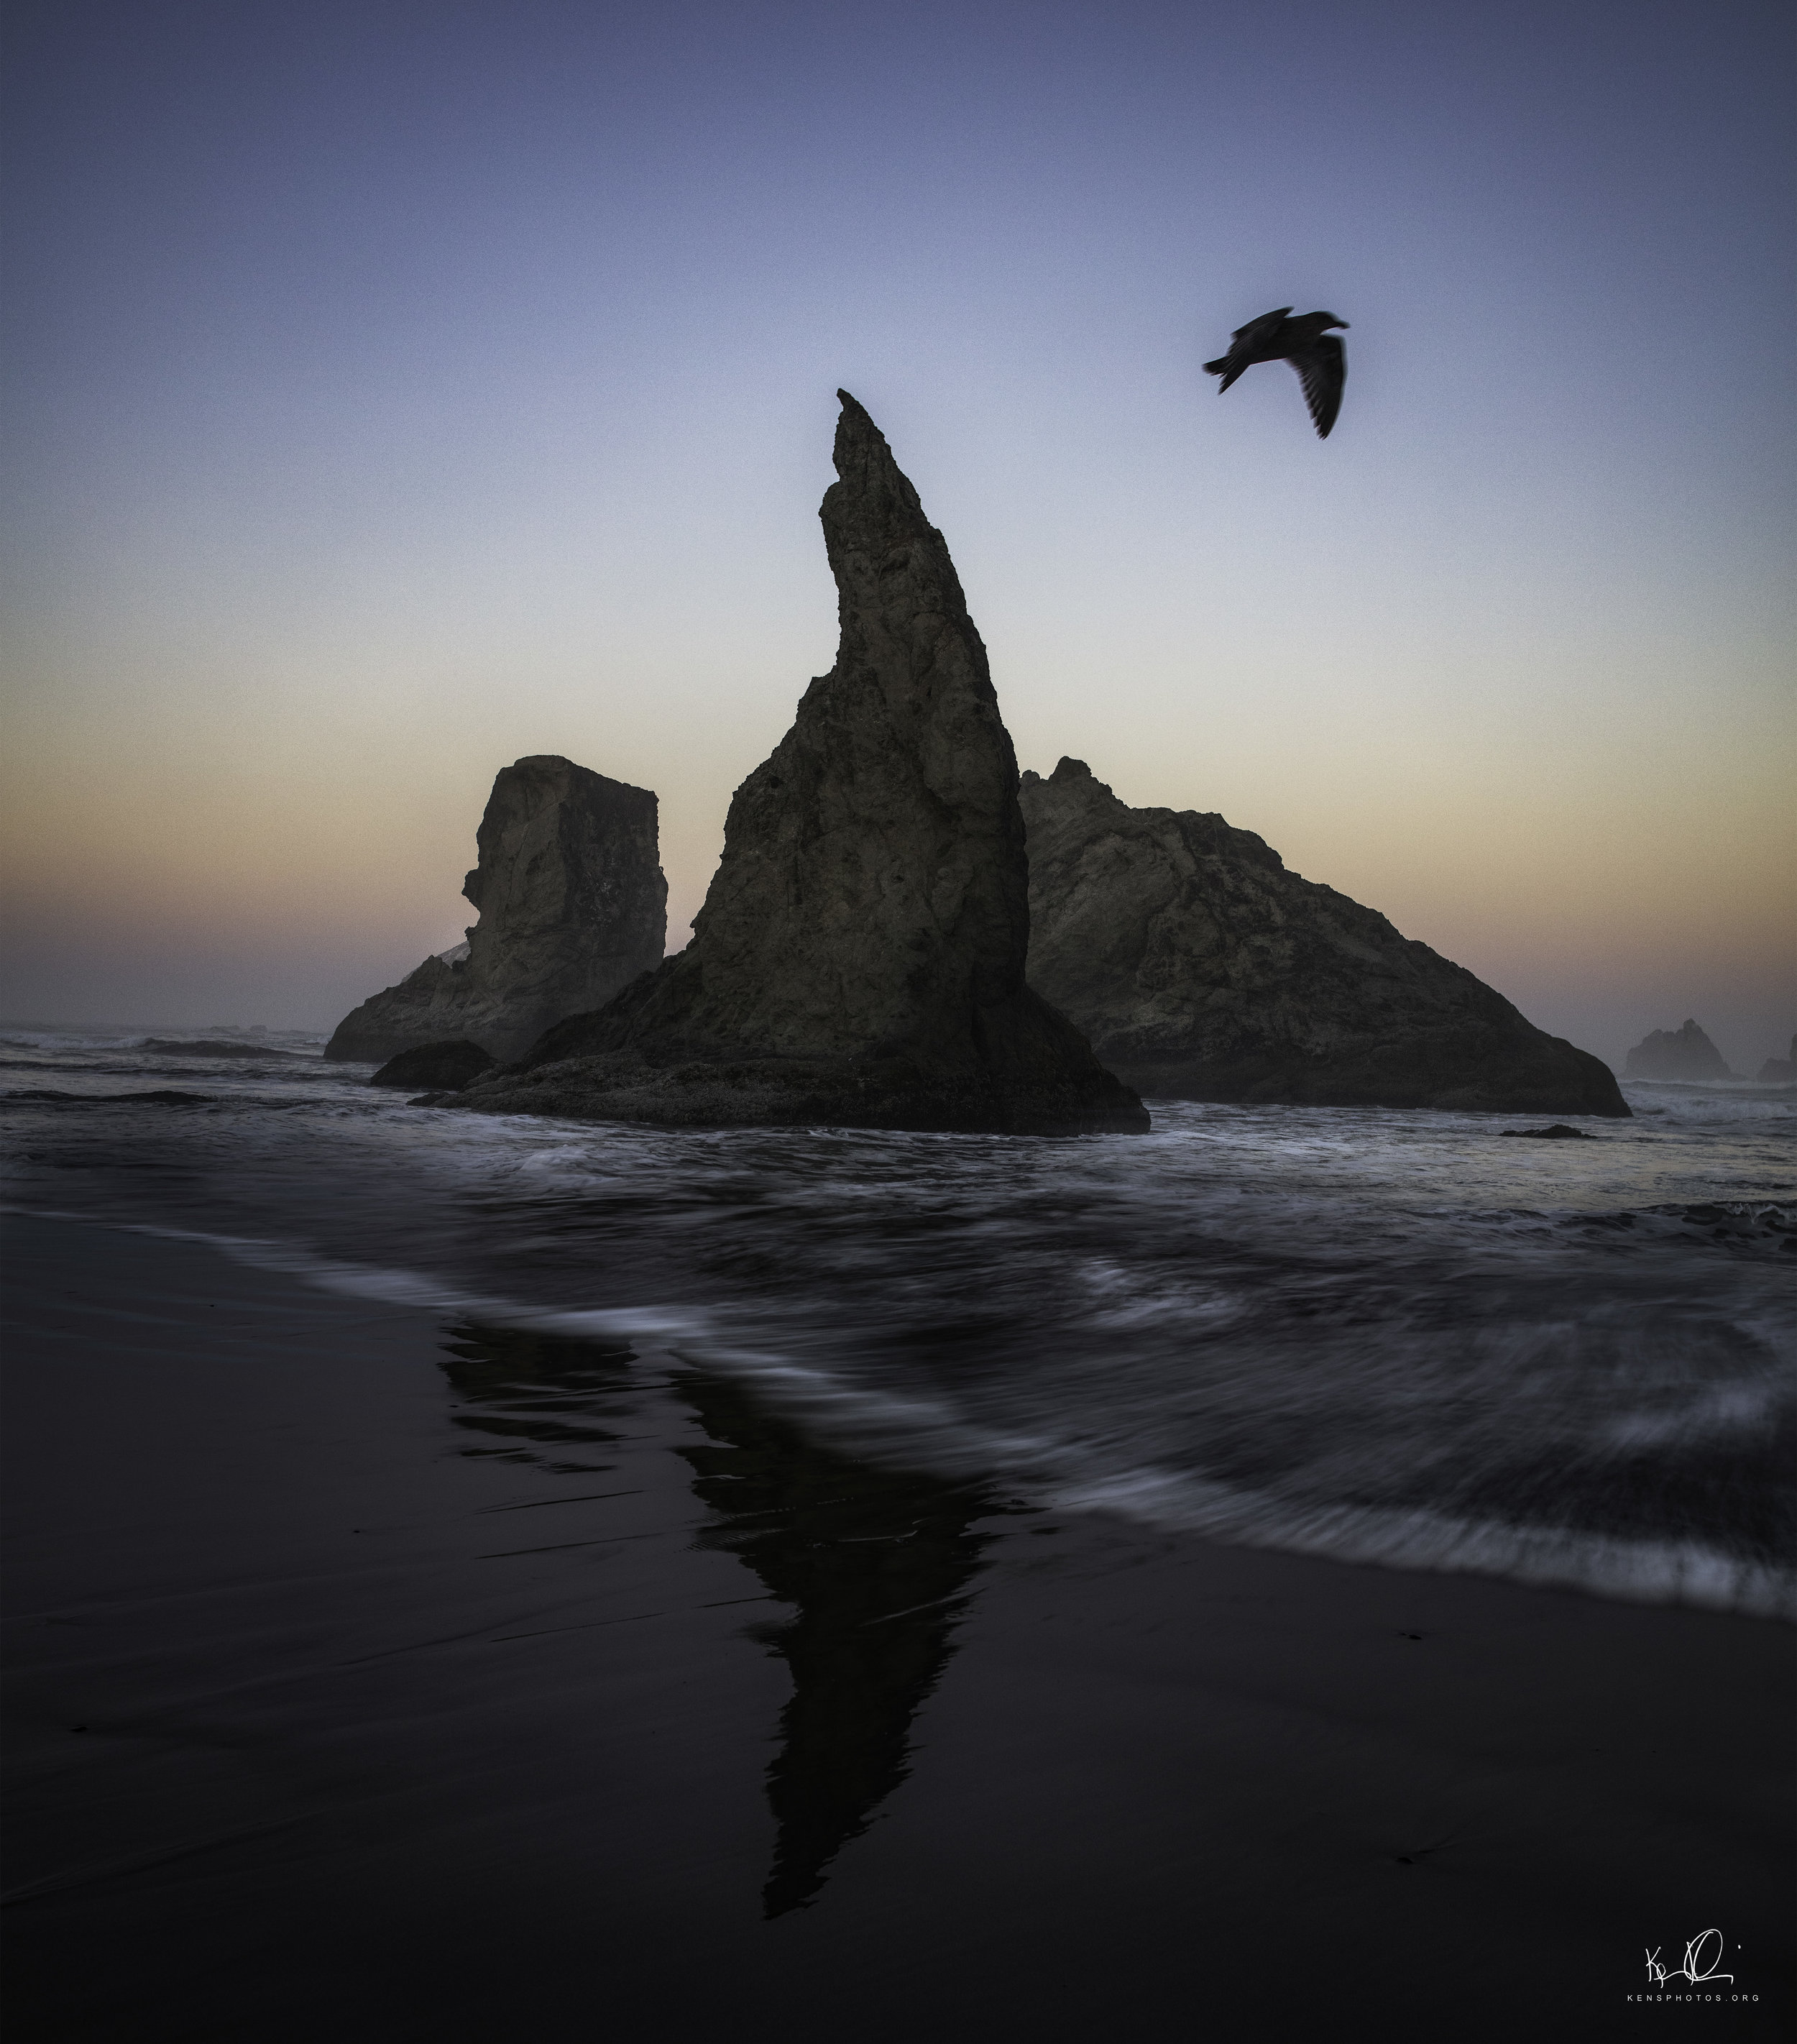   OREGON.   SEA STACKS.  NICE OF THAT BIRD TO HAPPEN TO FLY BYE…NOT.  I WAITED A HALF HOUR FOR HIM TO FLY IN THE RIGHT SPOT. 